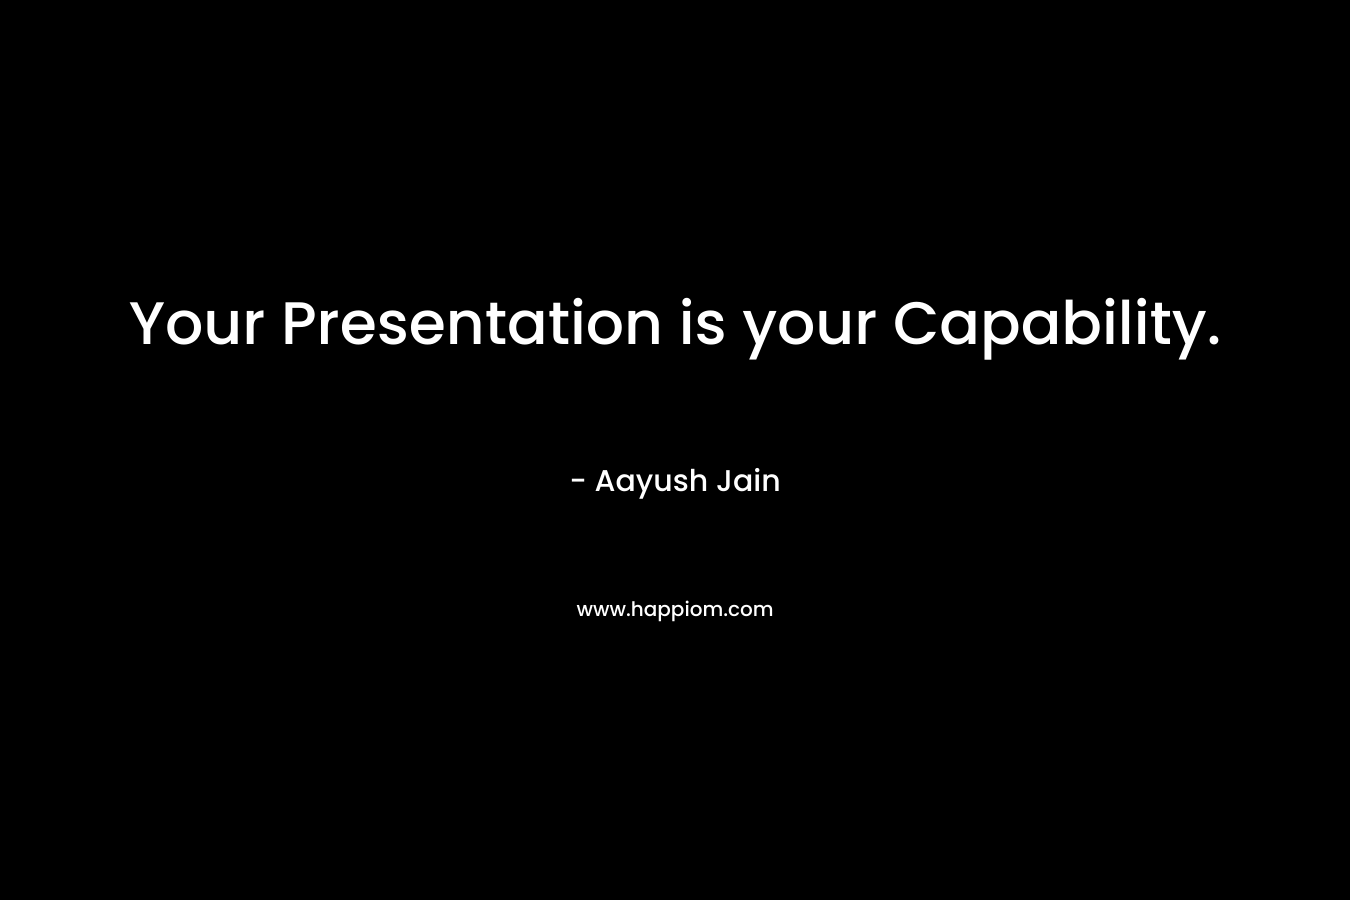 Your Presentation is your Capability.